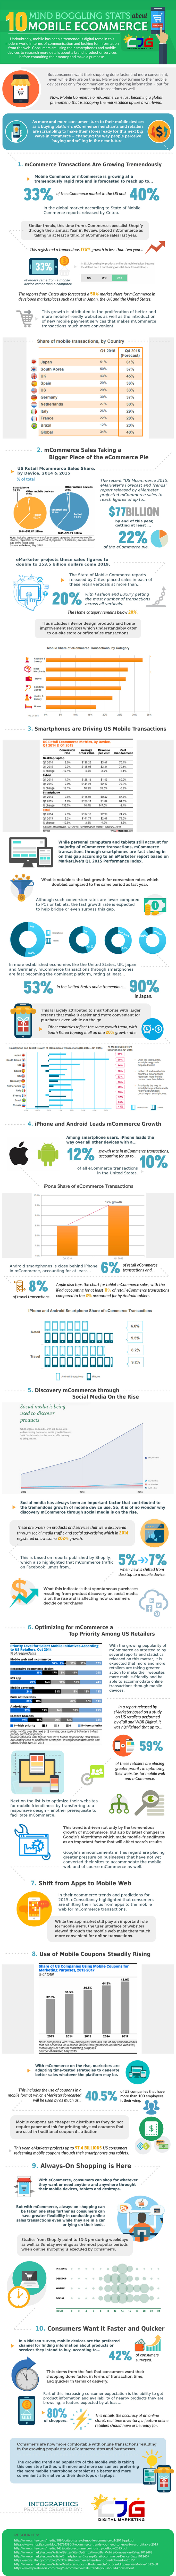 10 Mind Boggling Stats About Mobile Ecommerce